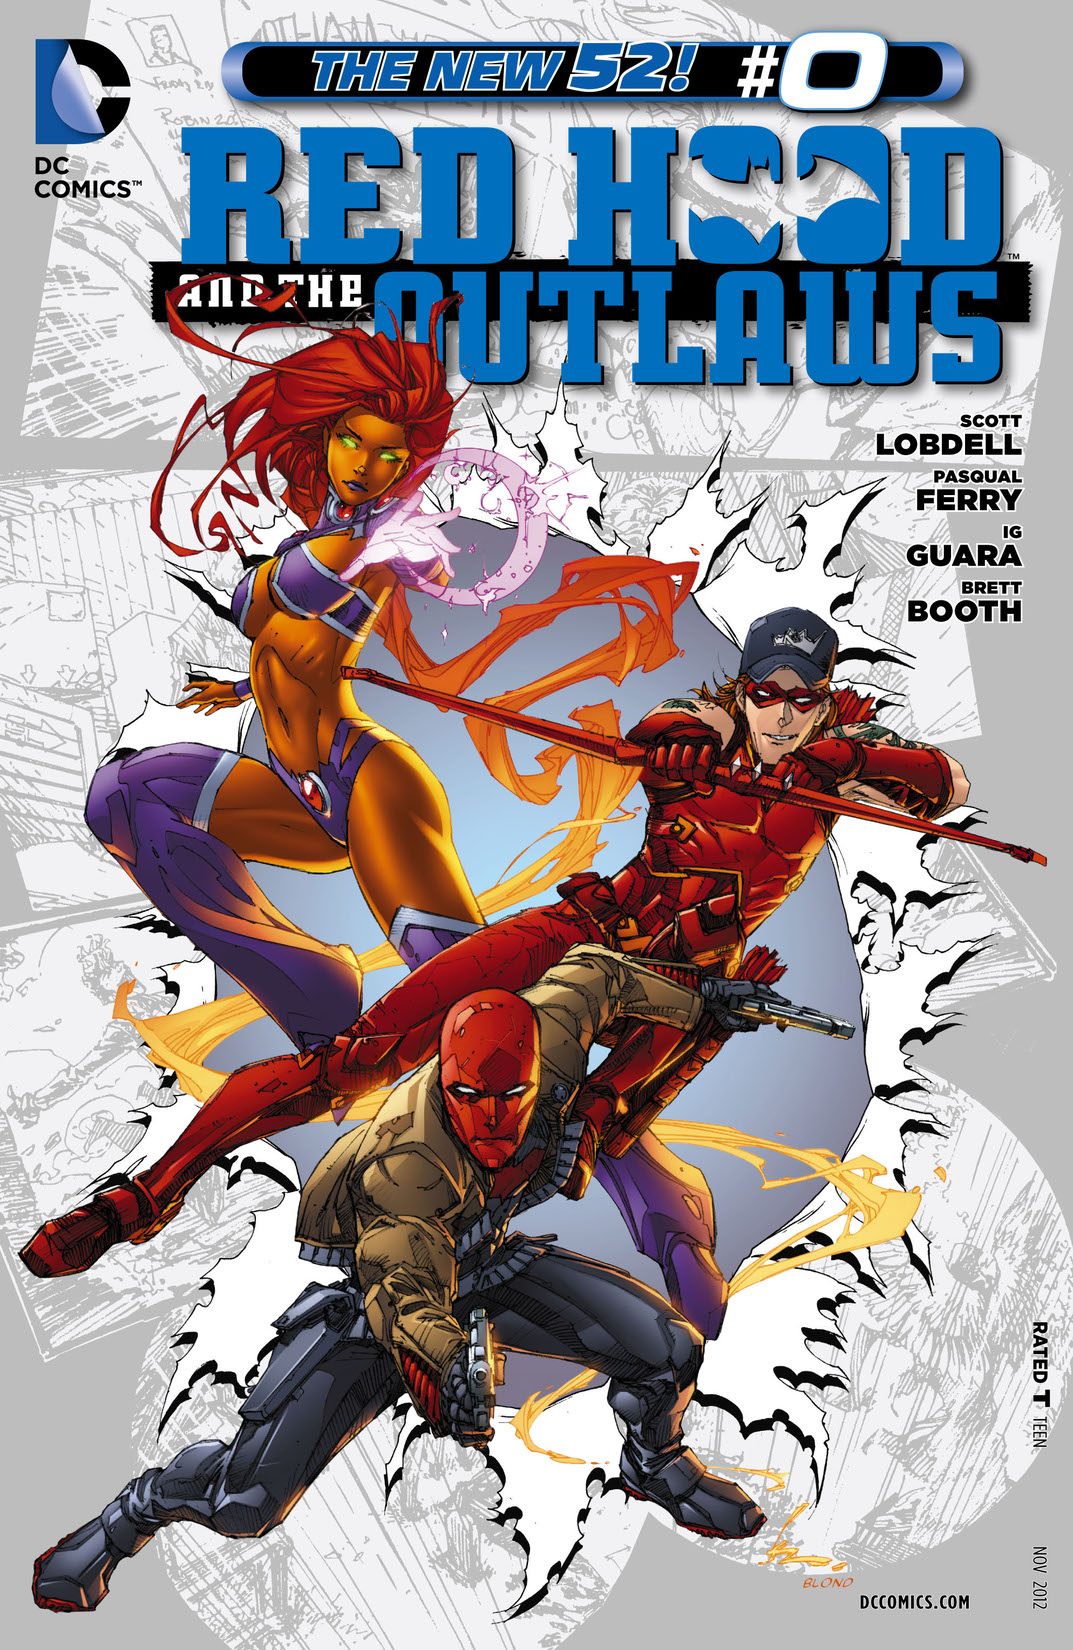 Red Hood and the Outlaws (2011-) #0 preview images